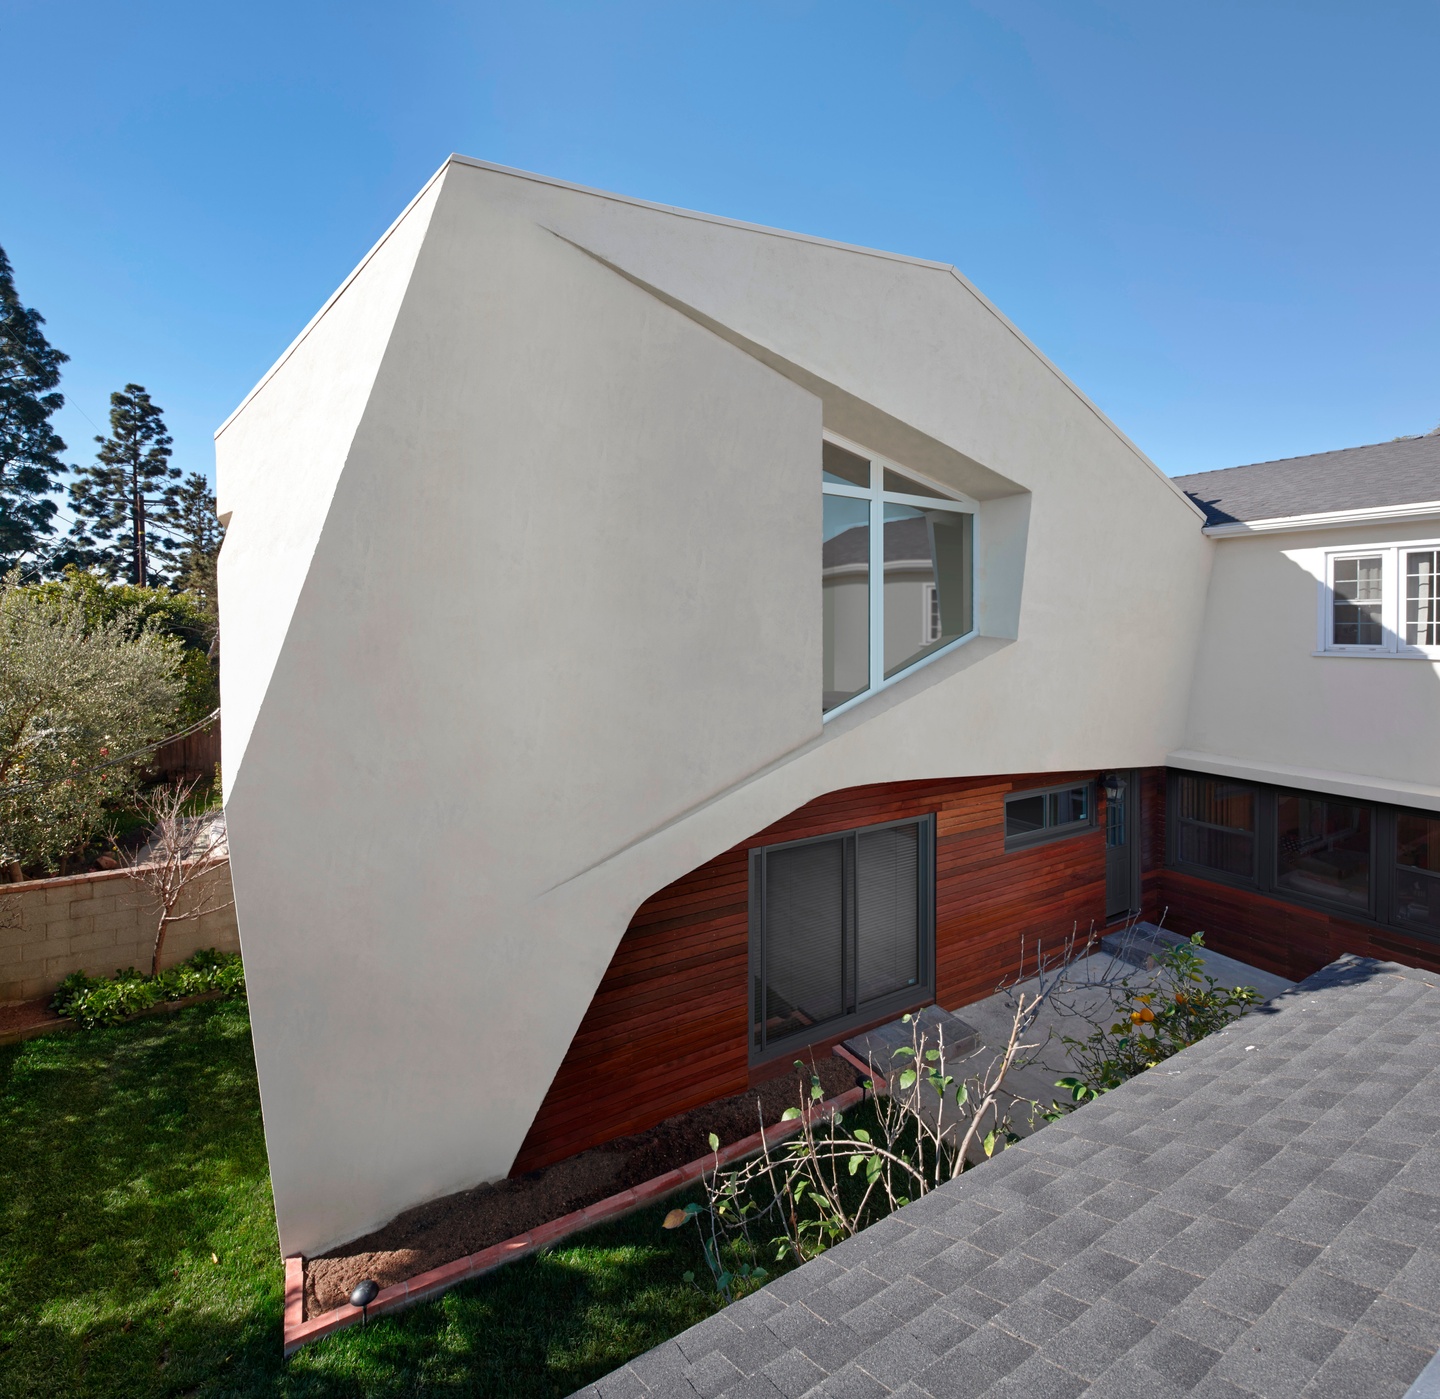 Exterior of a house with a white stucco wall projecting at unusual angles.